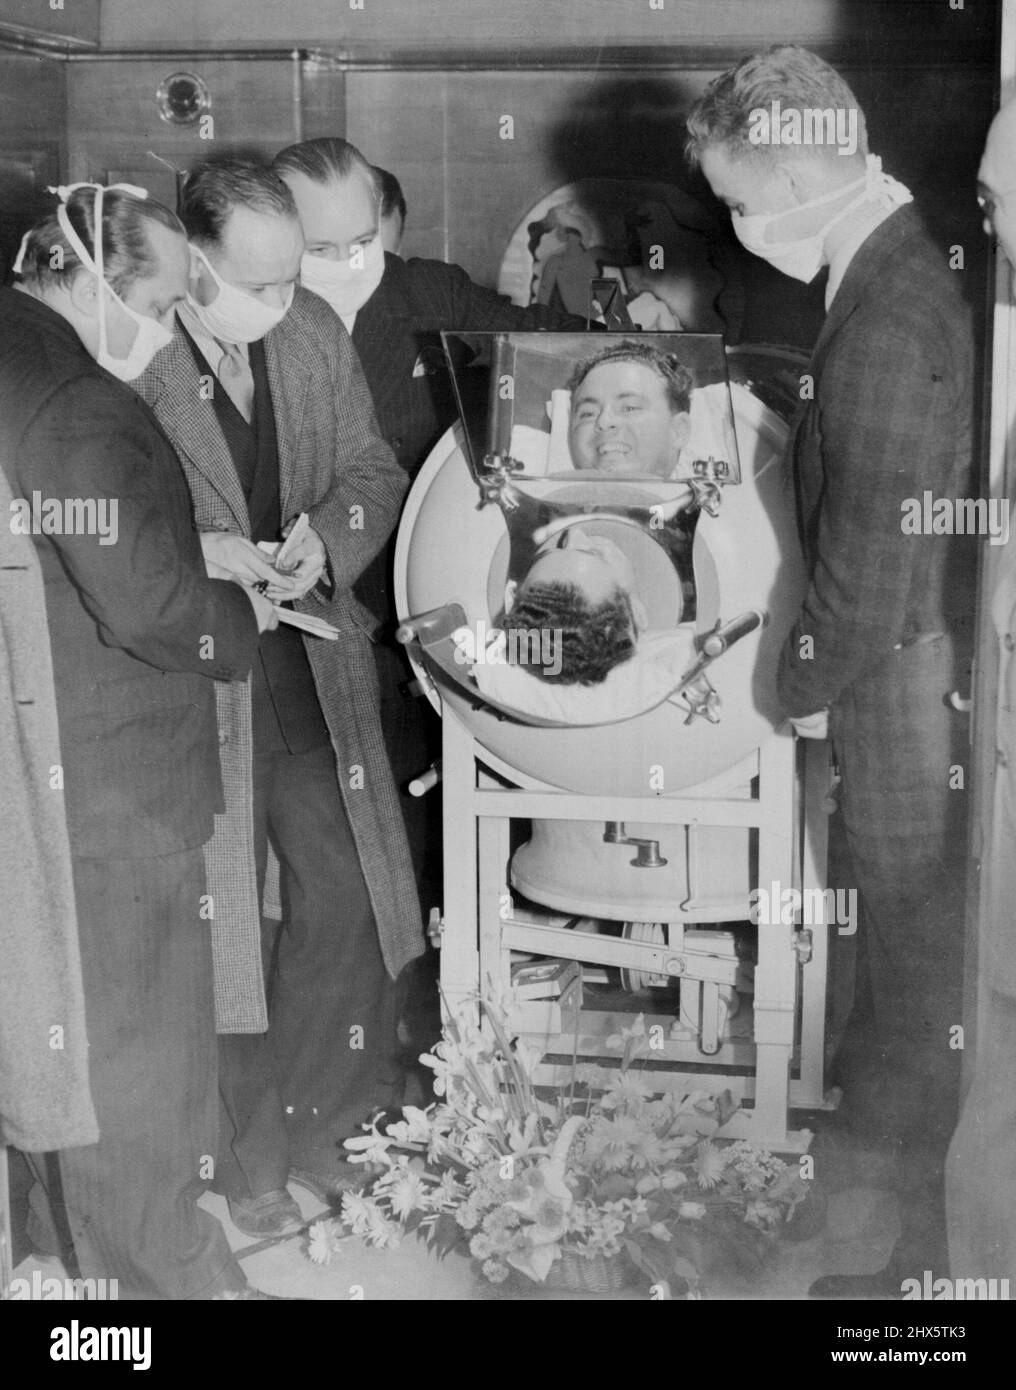 Snite Sails For Shrine Of Miracles -- From his iron lung which was been his home since 1936, 28-year-old Fred Snite, jr., infantile paralysis victim talks to reporters aboard the S.S. Normandie as he sailed from New York May 16 on a pilgrimage to Loudres, France, The Shrine of Miracles. May 16, 1939. (Photo by Associated Press Photo). Stock Photo